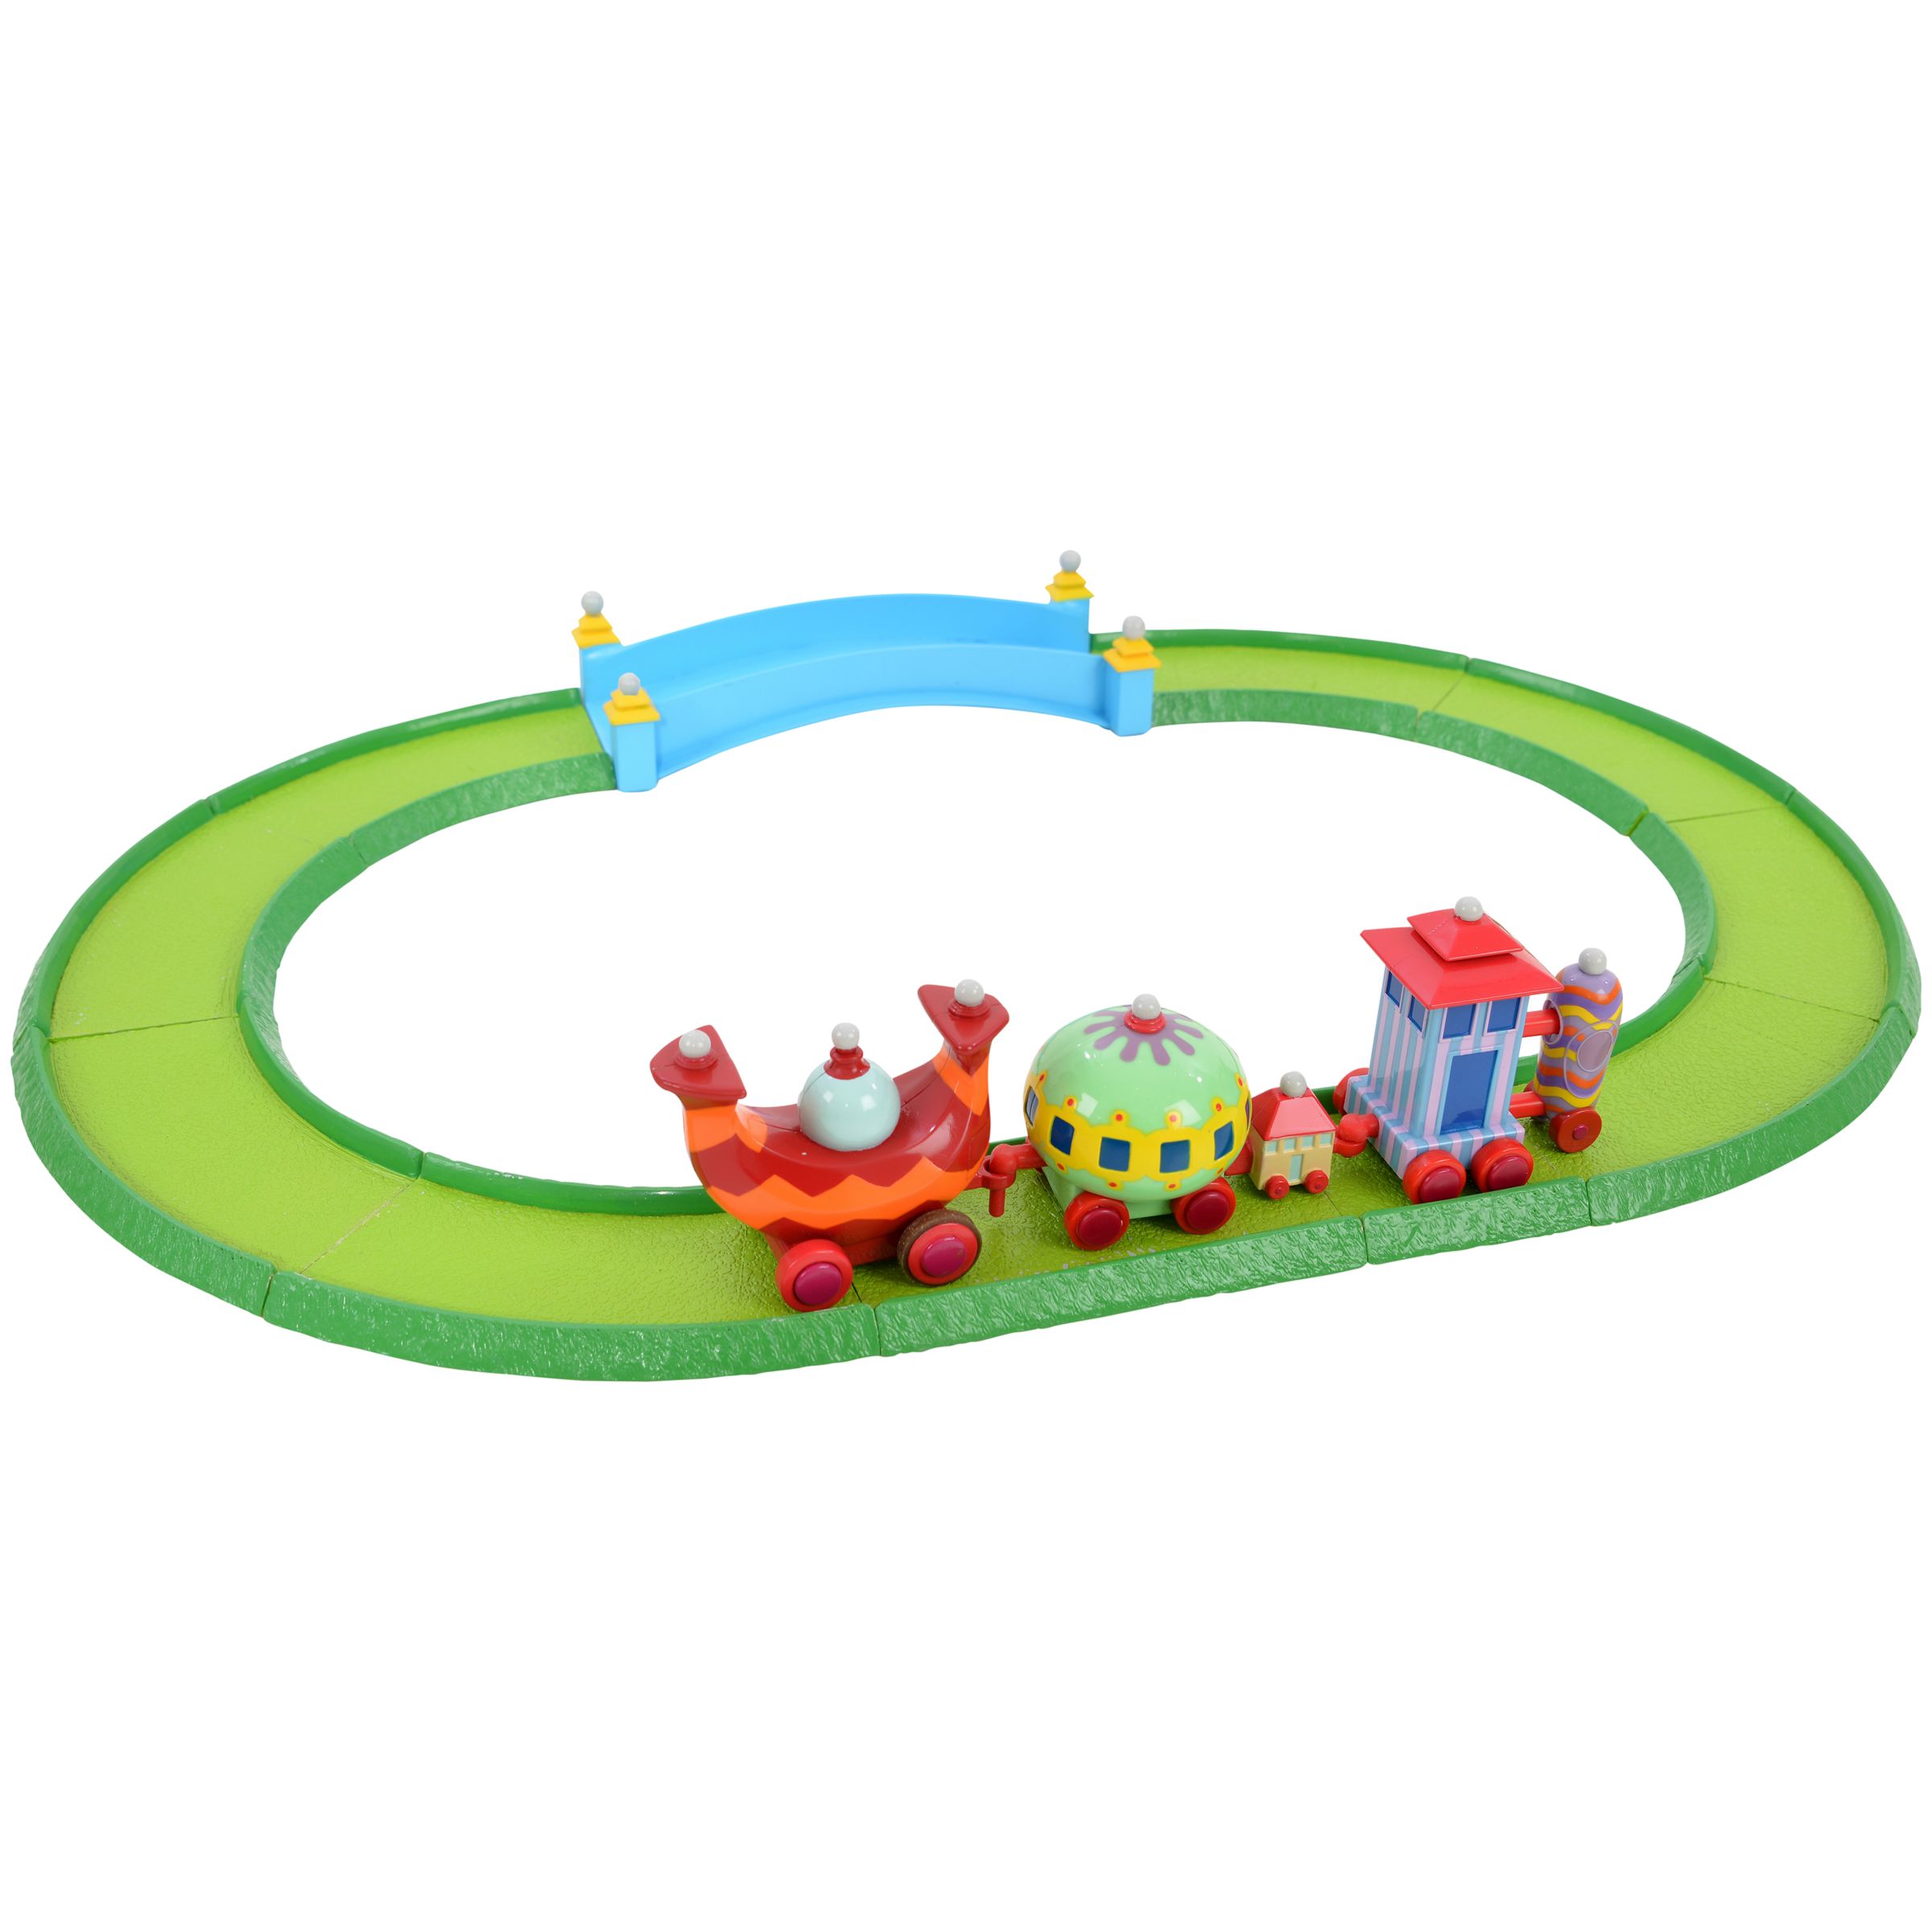 in the night garden ninky nonk train and characters playset